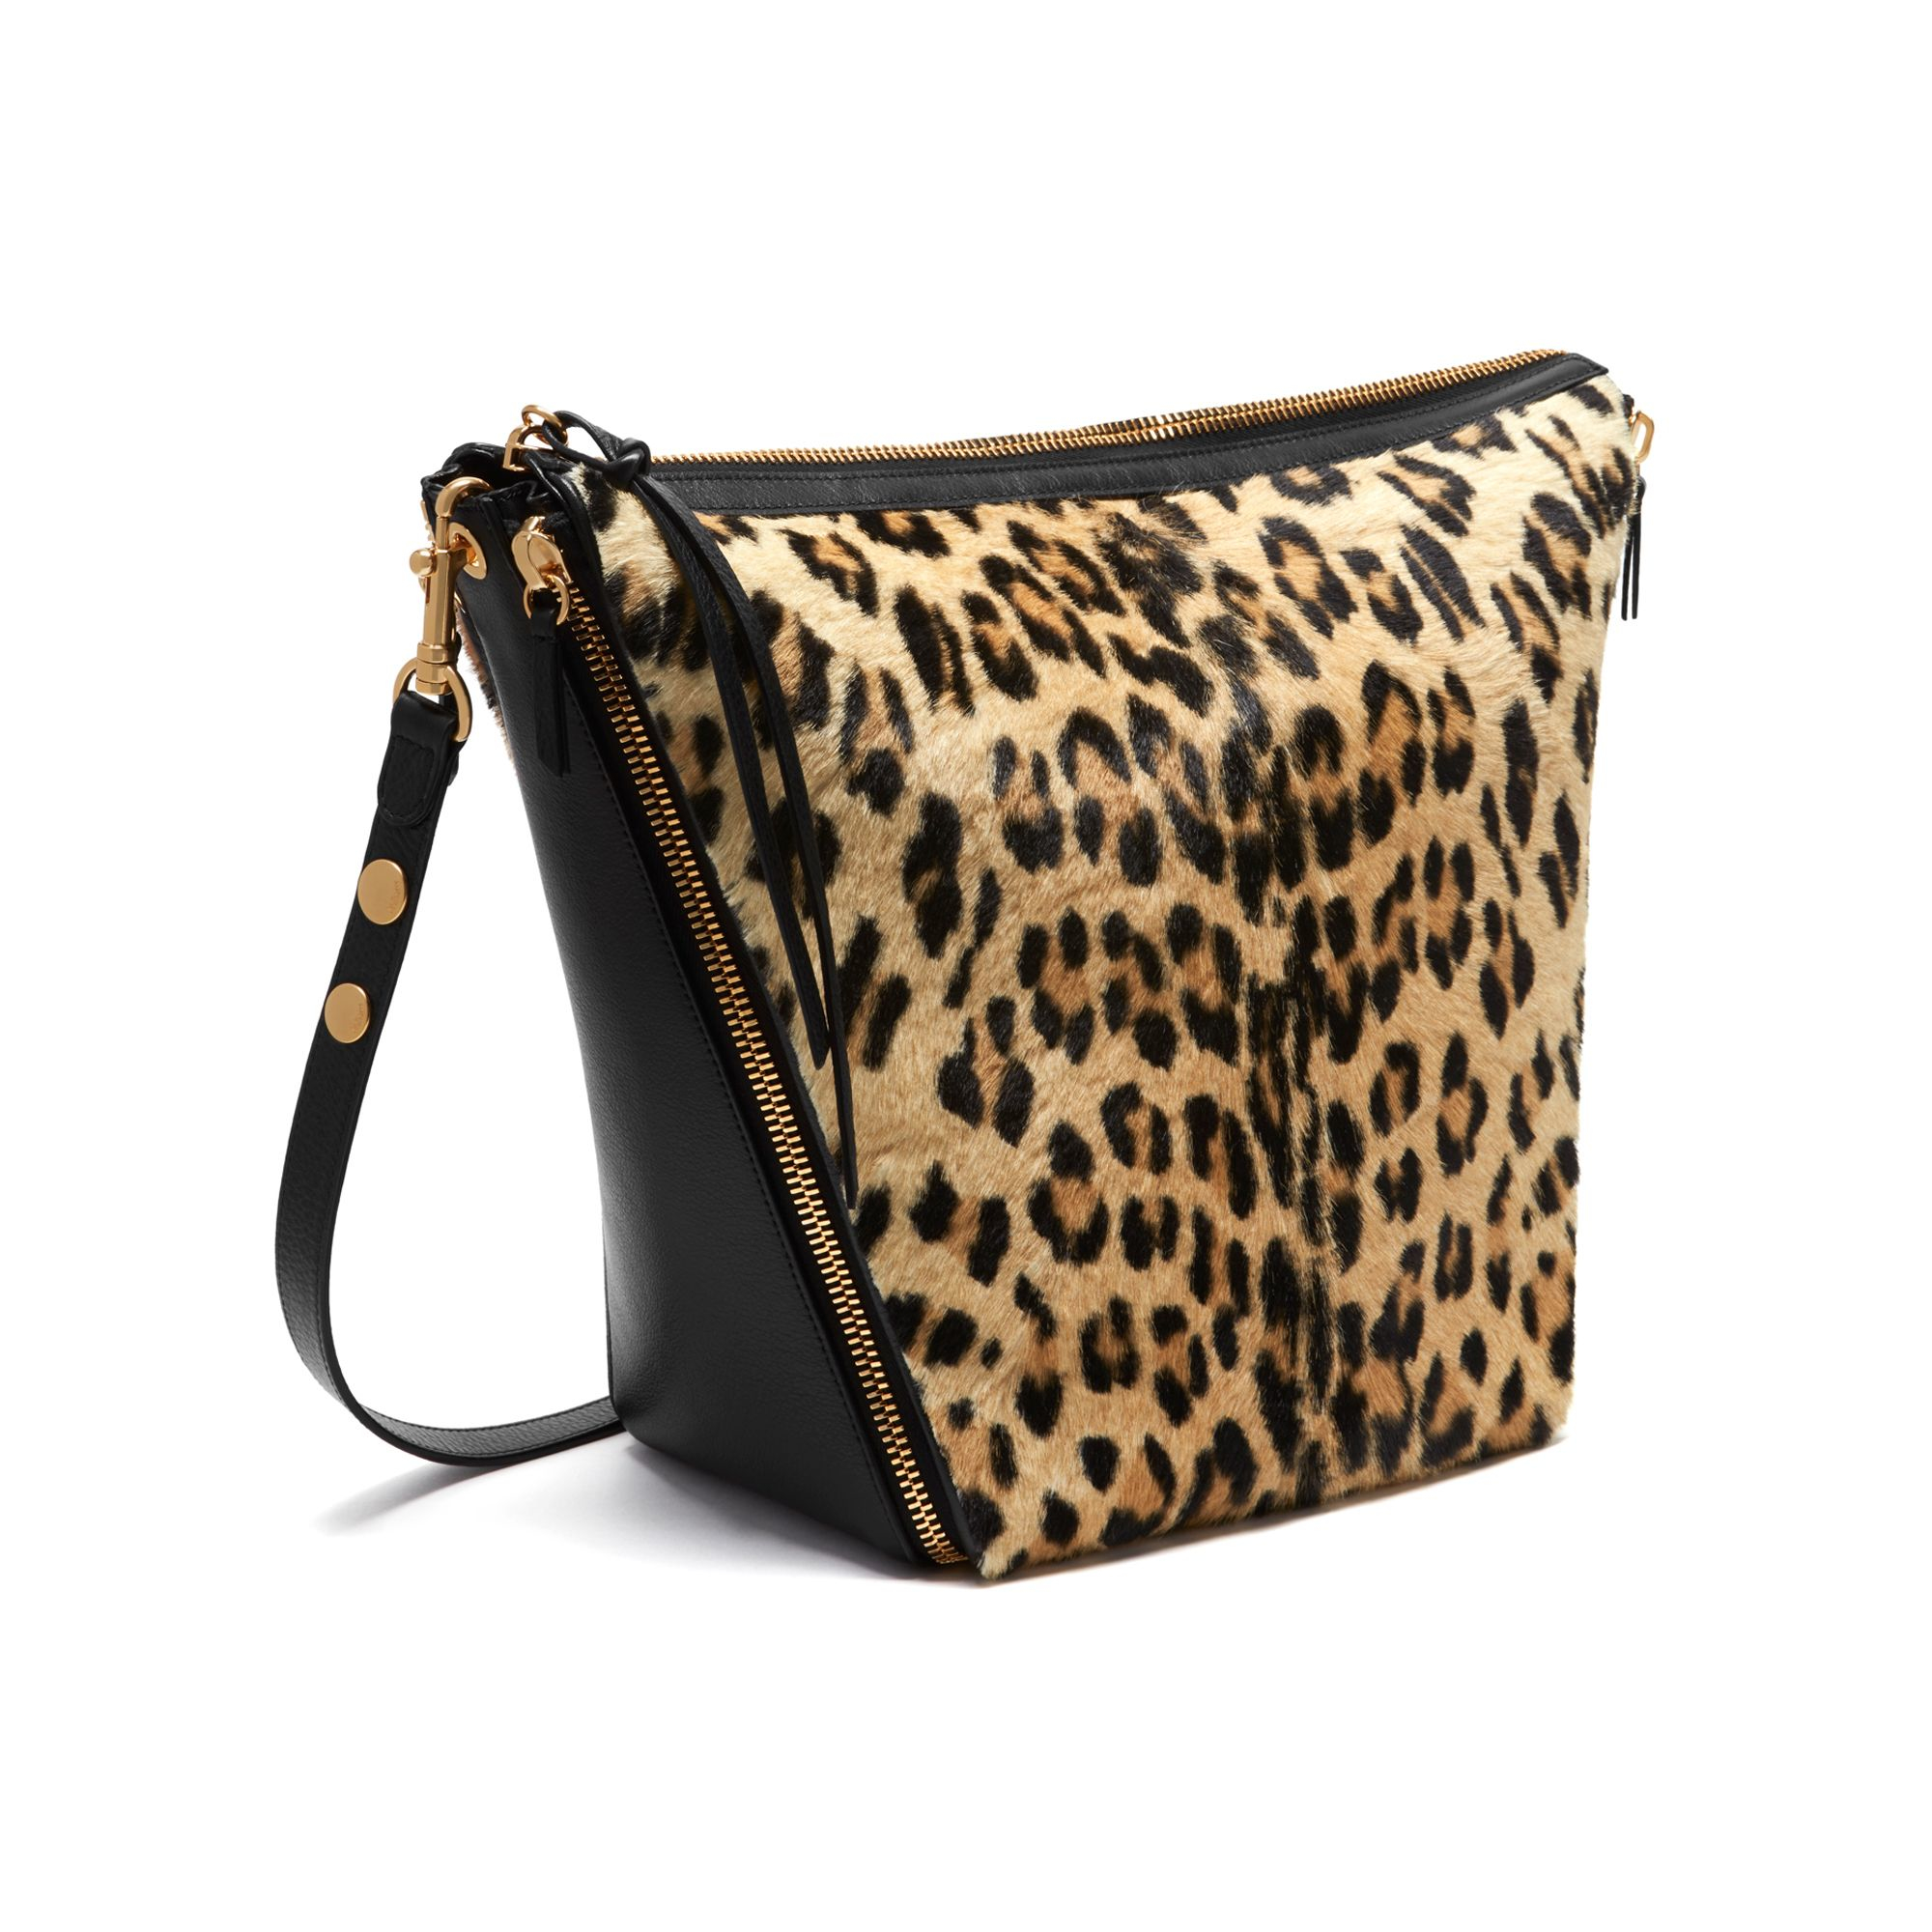 Lyst - Mulberry Camden Leopard-Print Calf Hair And Leather Tote Bag in ...